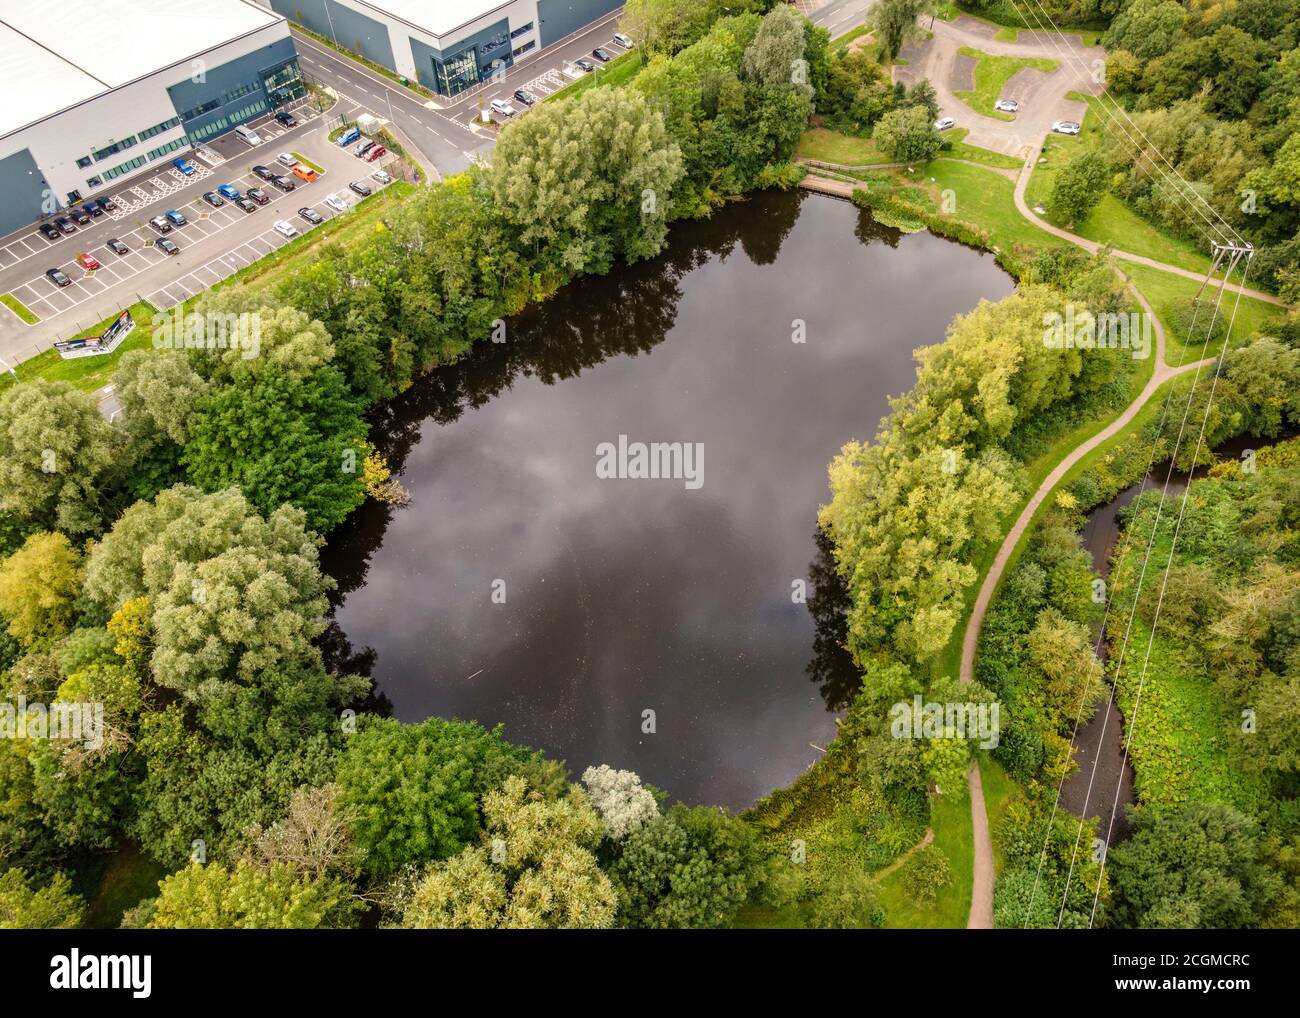 Ipsley Mill Pond, lago artificiale a Redditch, Worcestershire, foto aerea. Foto Stock